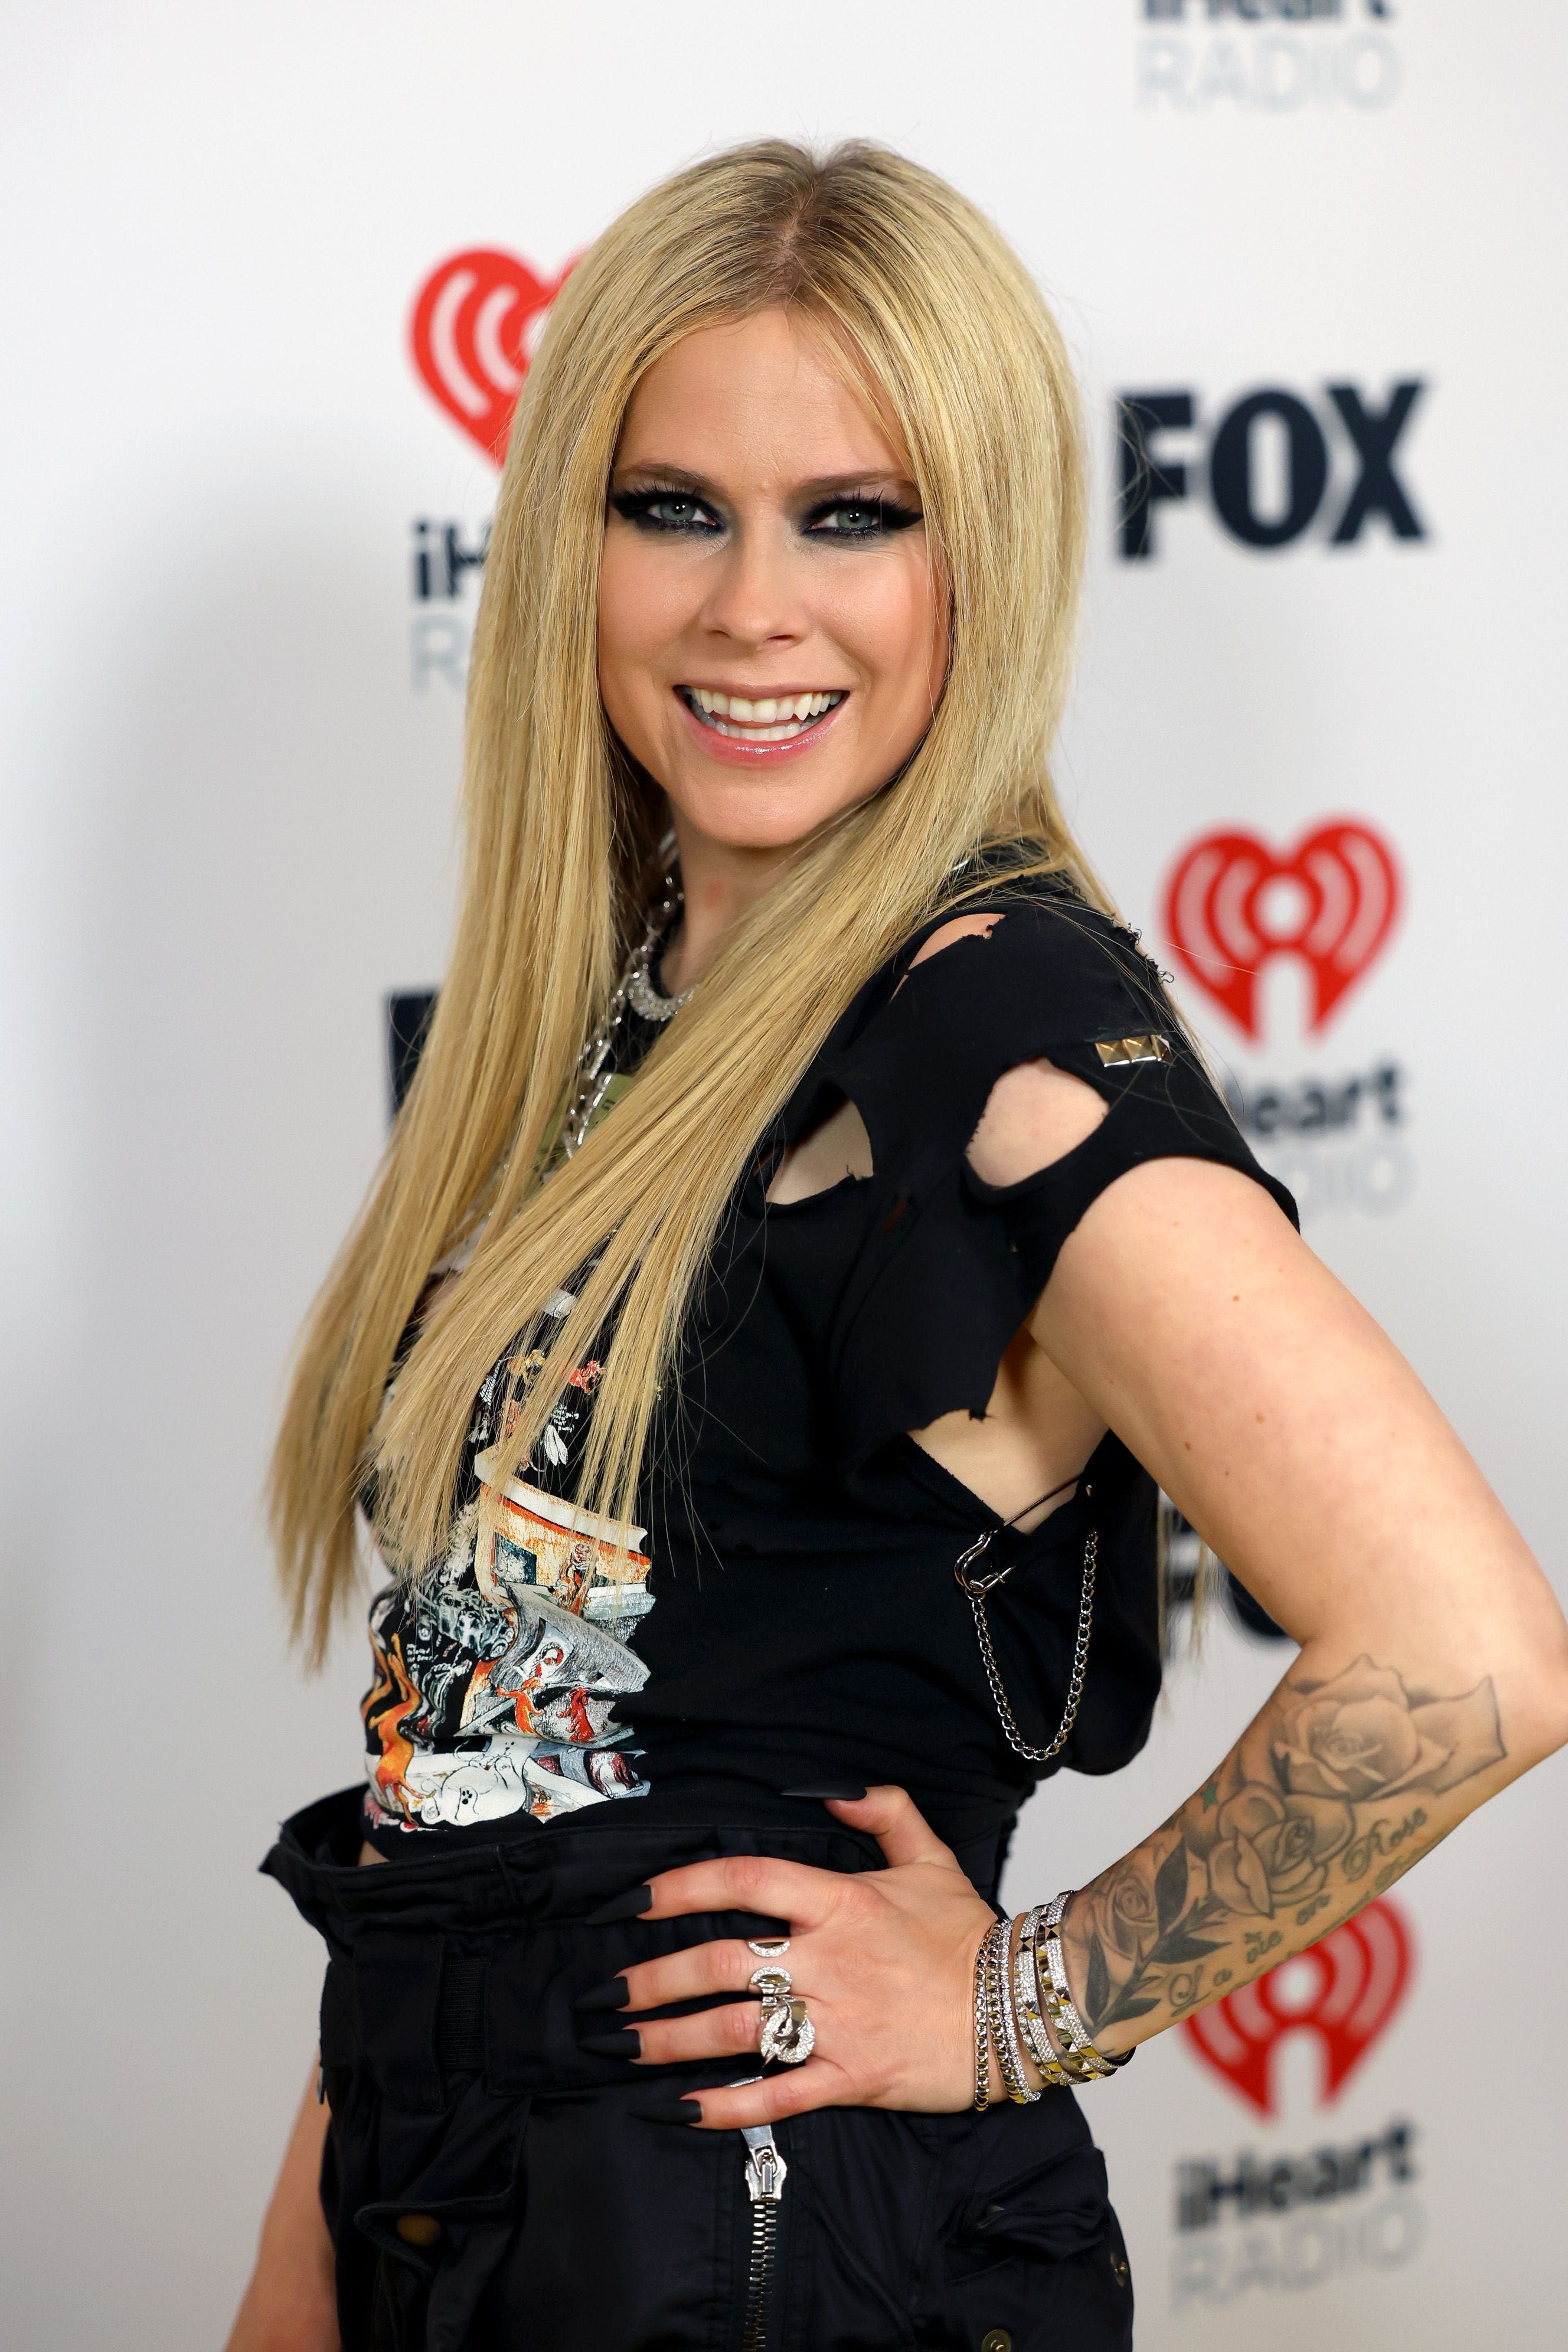 Avril Lavigne addresses conspiracy theory that she died. Why do so many believe it?